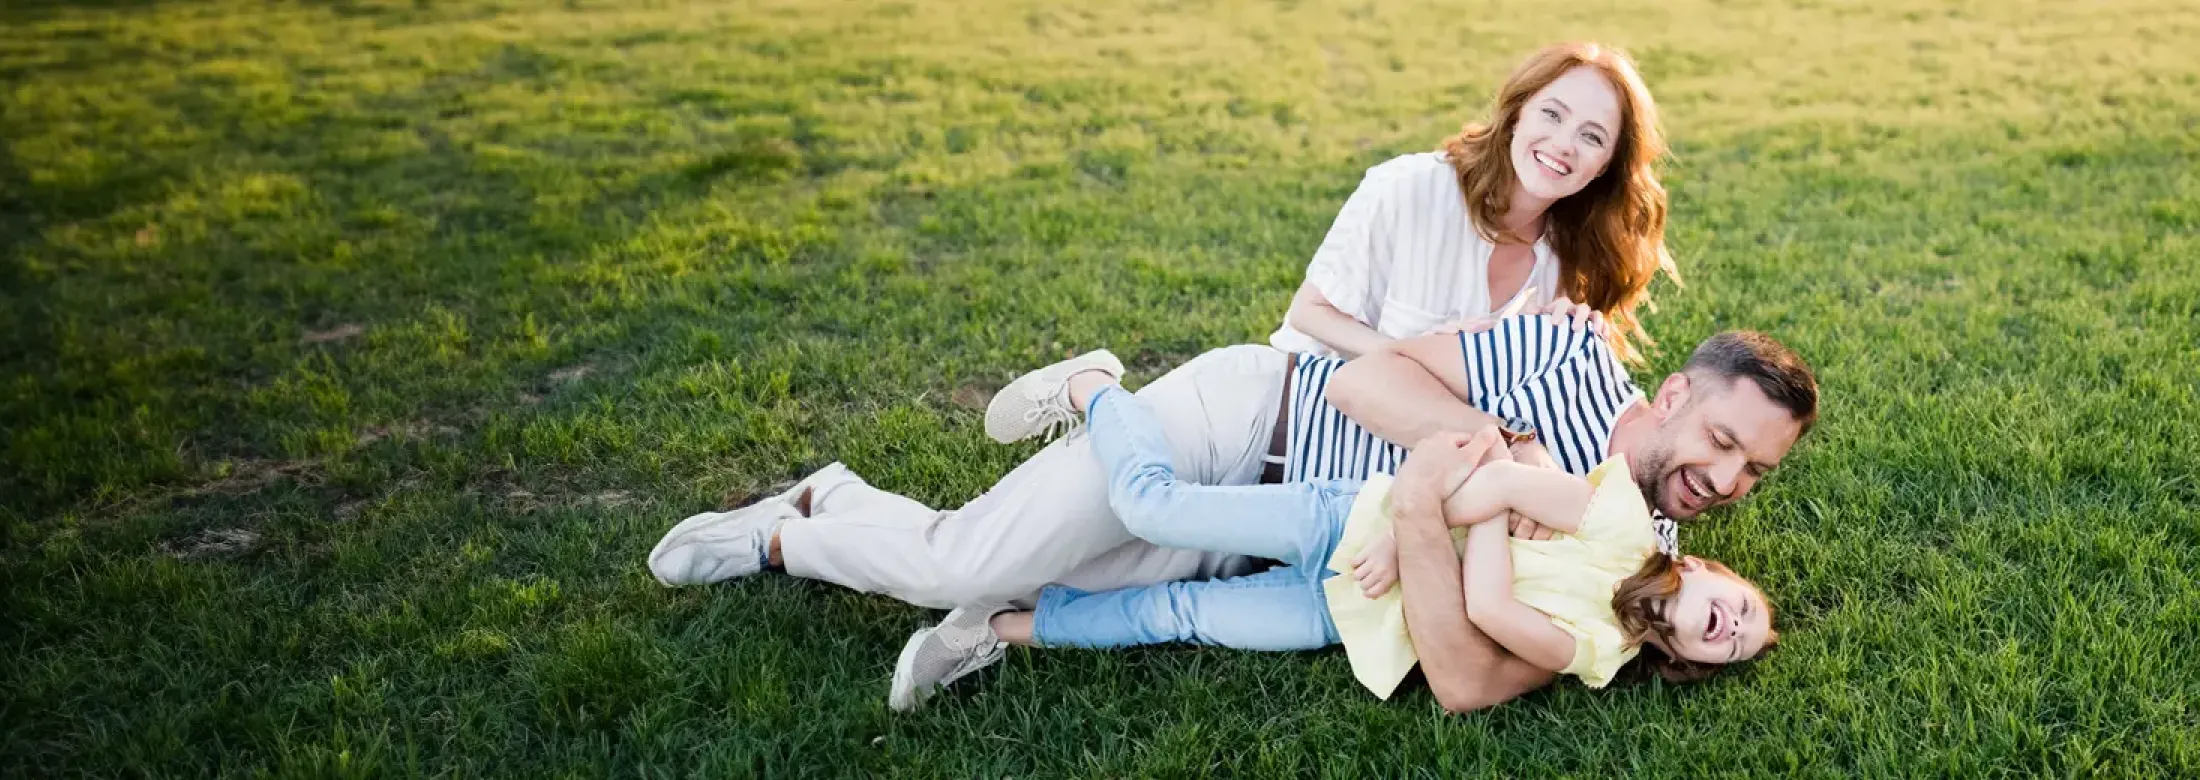 mom, dad, and daughter laughing outside laying in grass